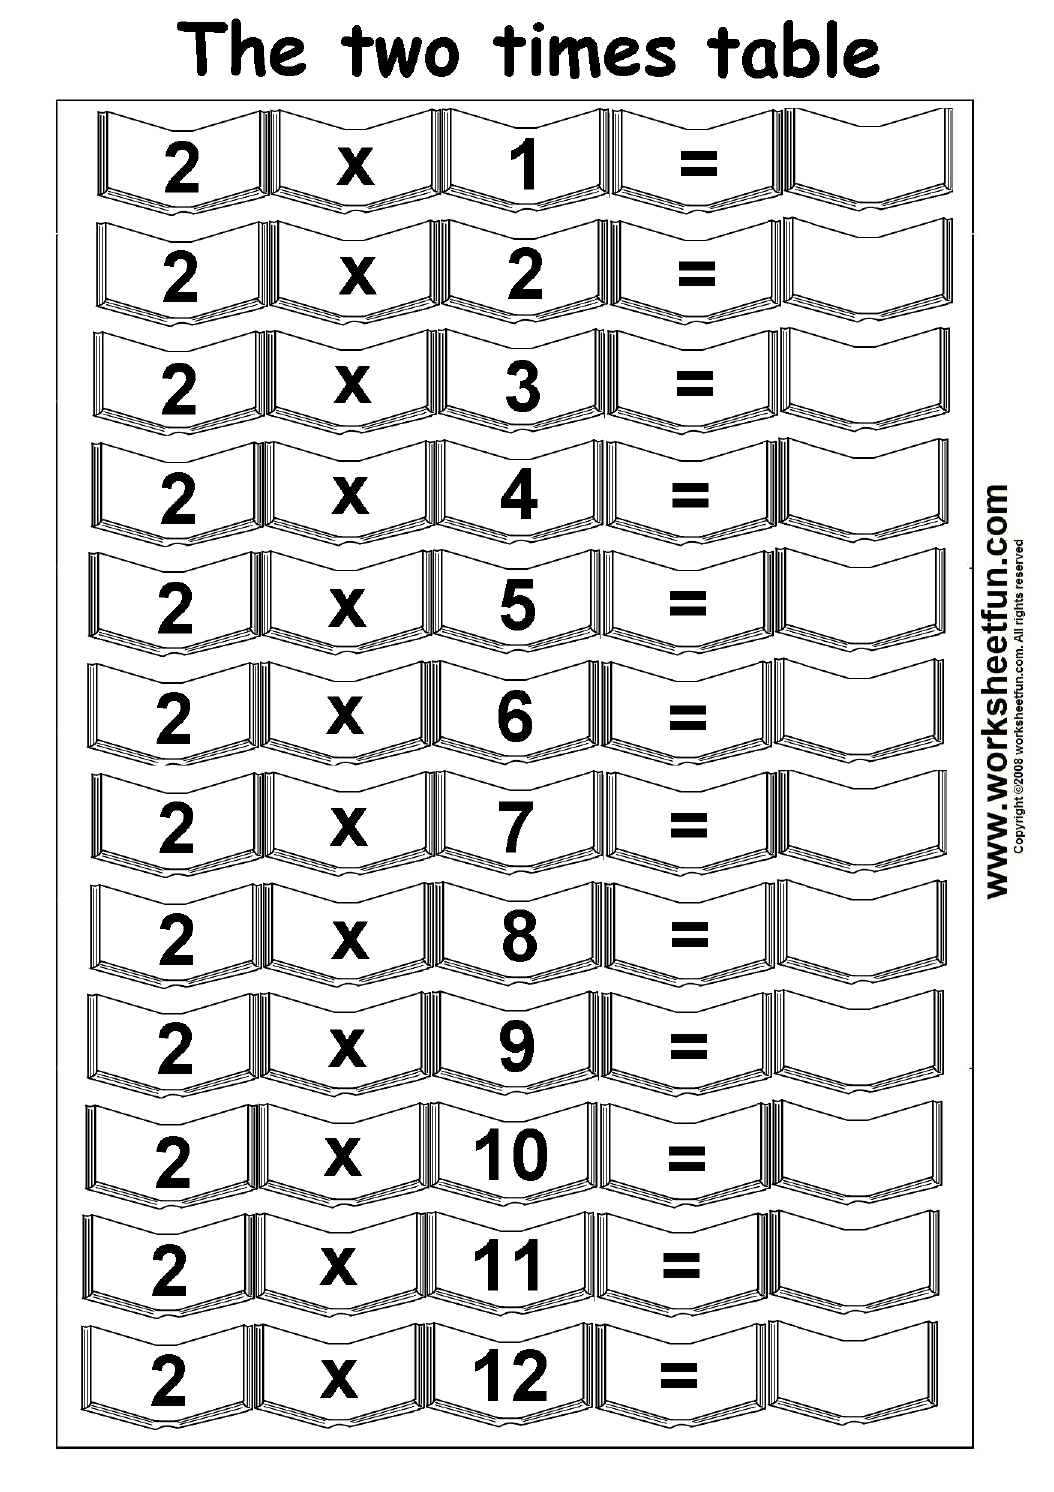 Multiplication Times Tables Worksheets – 20, 20, 20 & 20 Times Tables Regarding 2 Times Table Worksheet